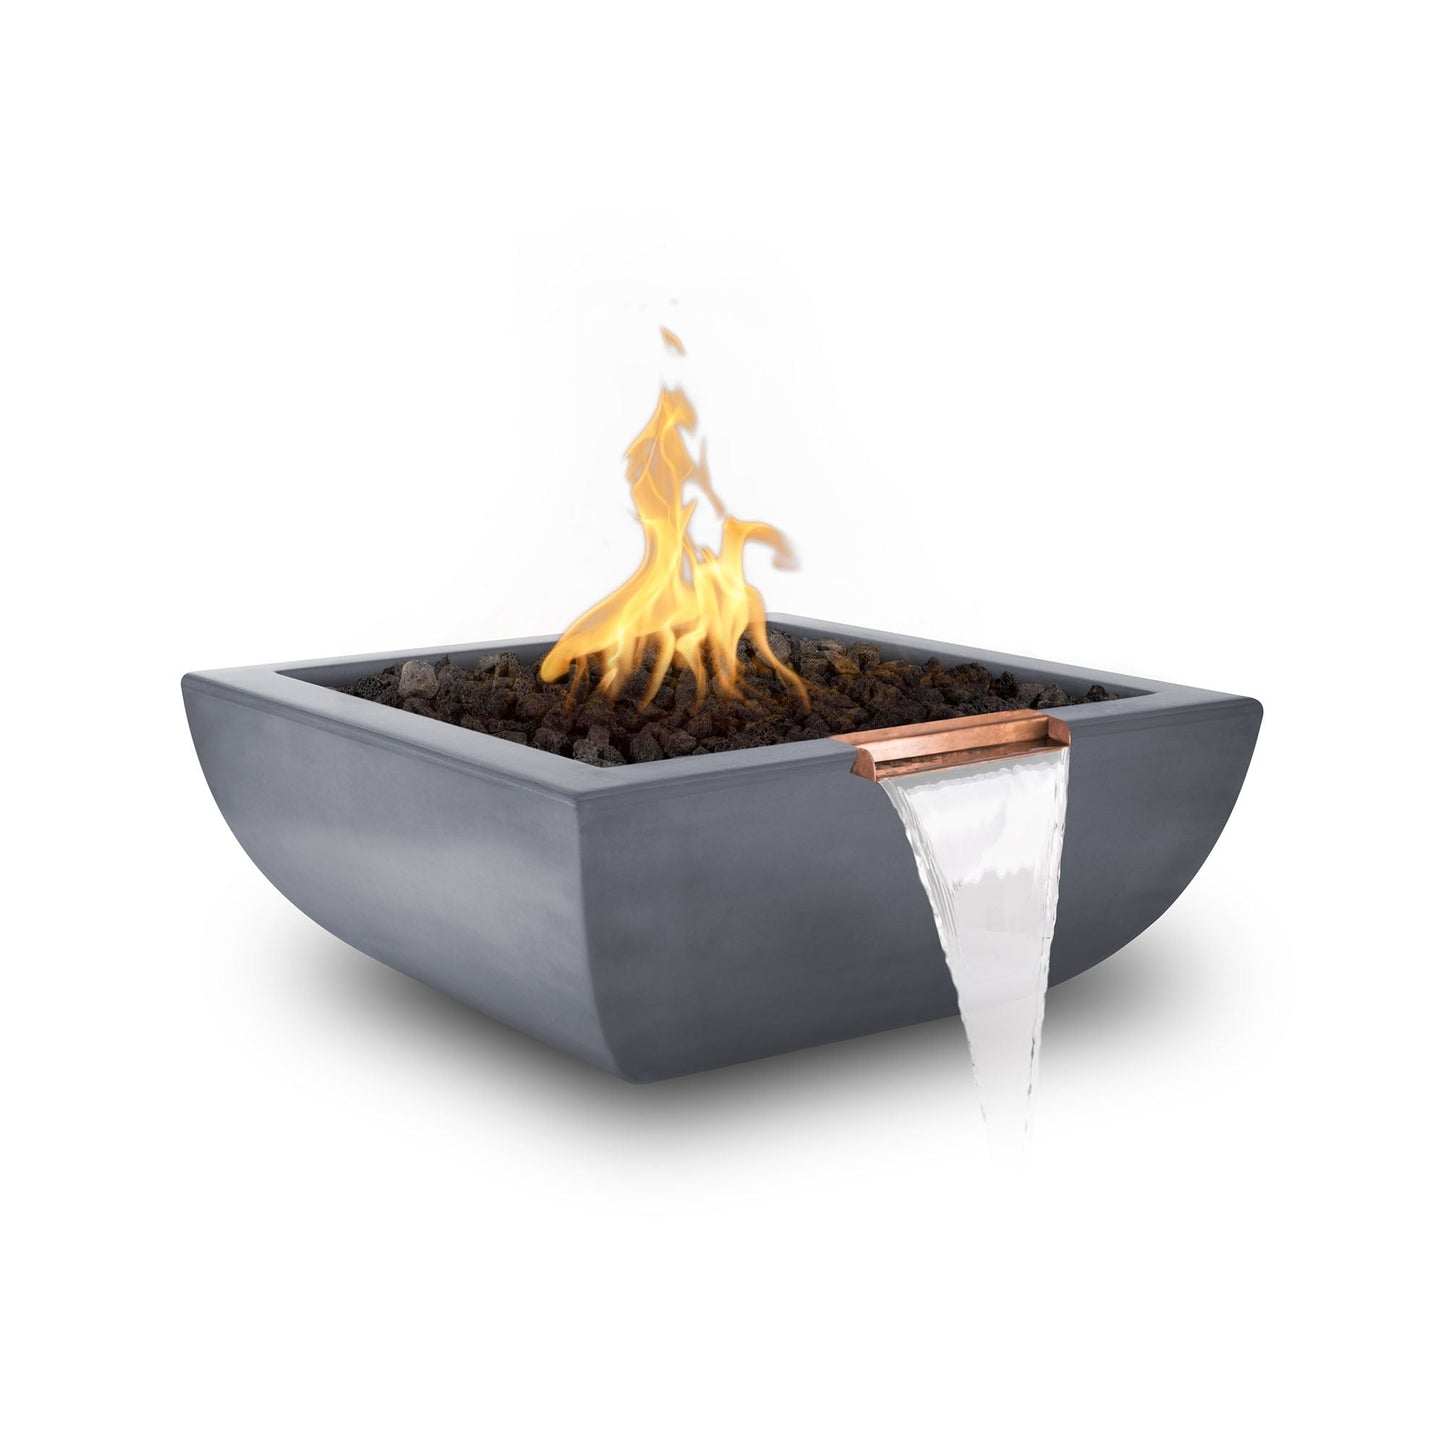 The Outdoor Plus Square Avalon 30" Rustic Coffee GFRC Concrete Liquid Propane Fire & Water Bowl with Match Lit with Flame Sense Ignition